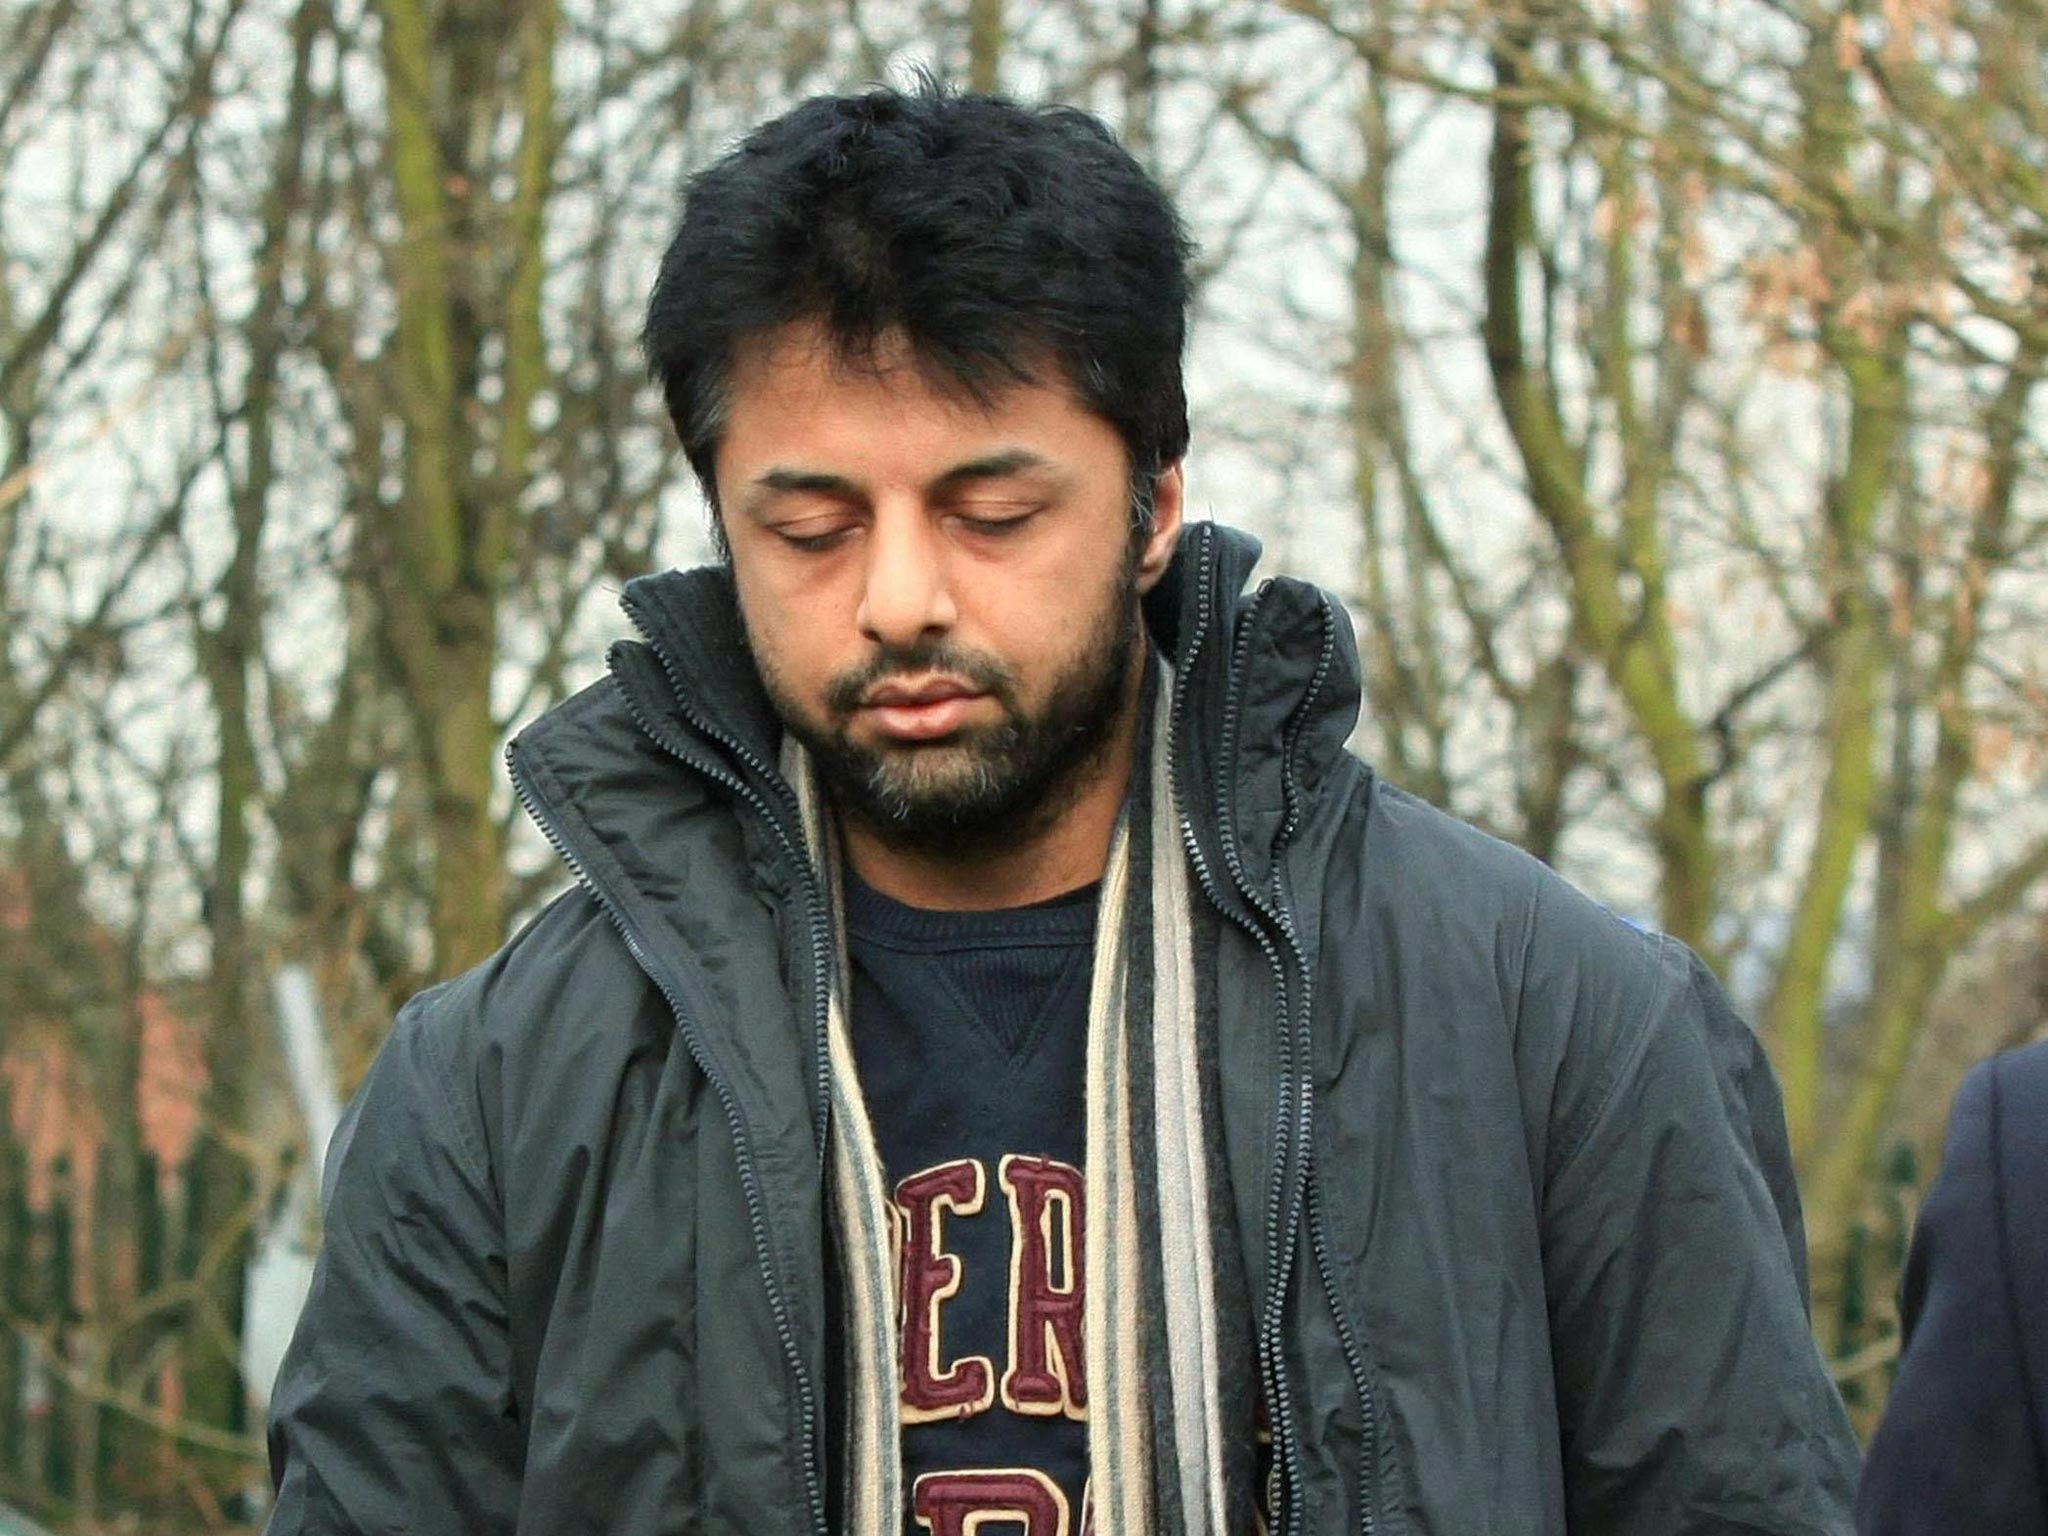 January 2011: Shrien Dewani has been receiving treatment for depression and post traumatic stress disorder at mental hospitals near Bristol since his wife's death.